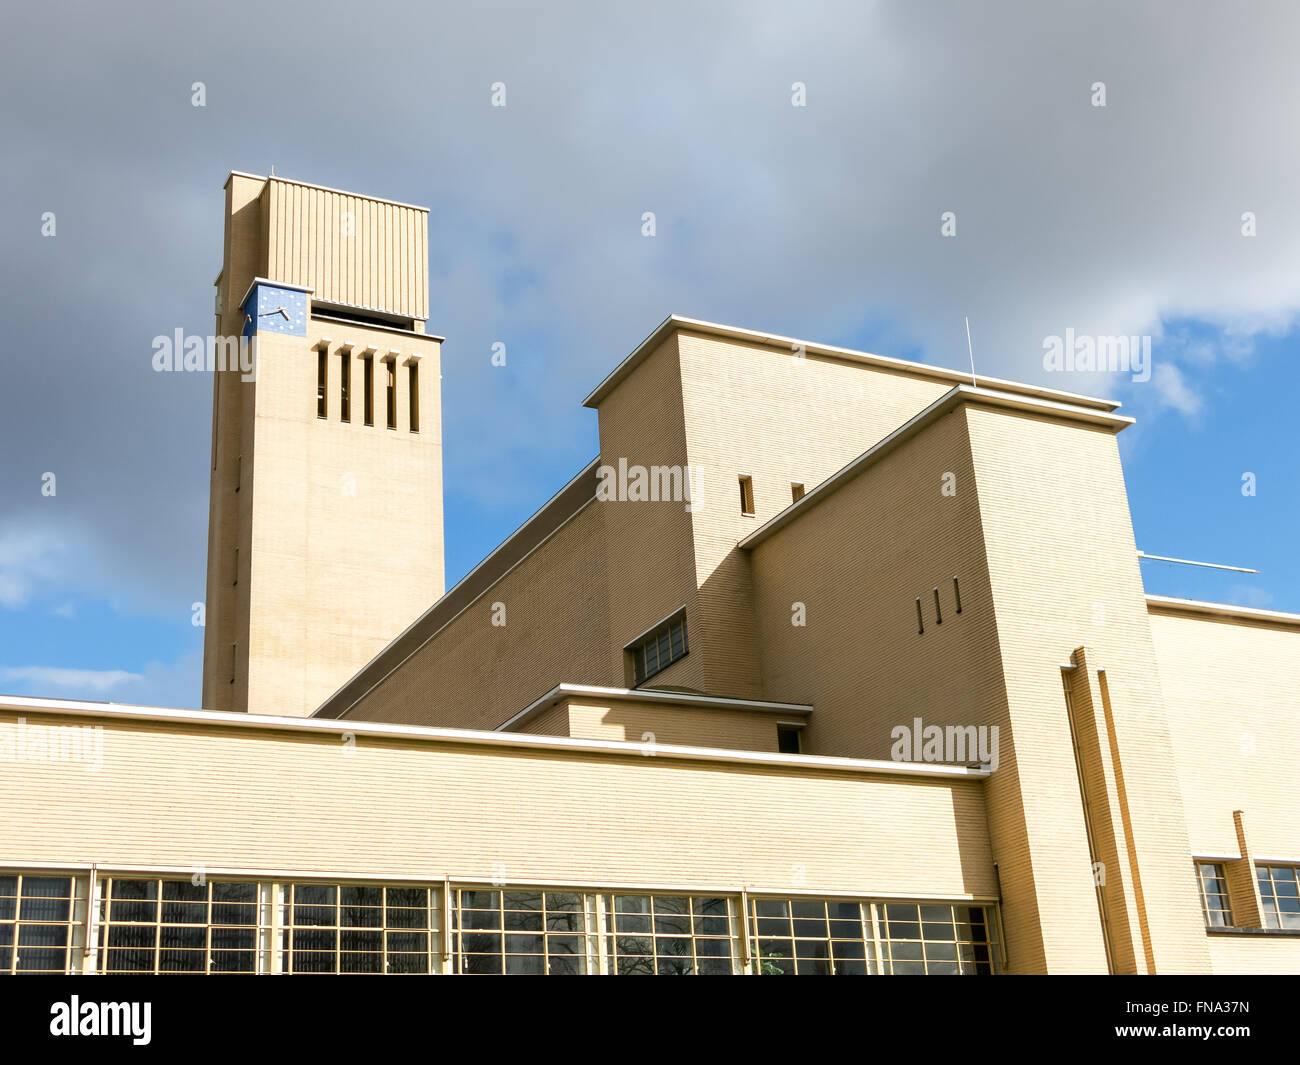 Town Hall by Dudok in Hilversum, Netherlands Stock Photo